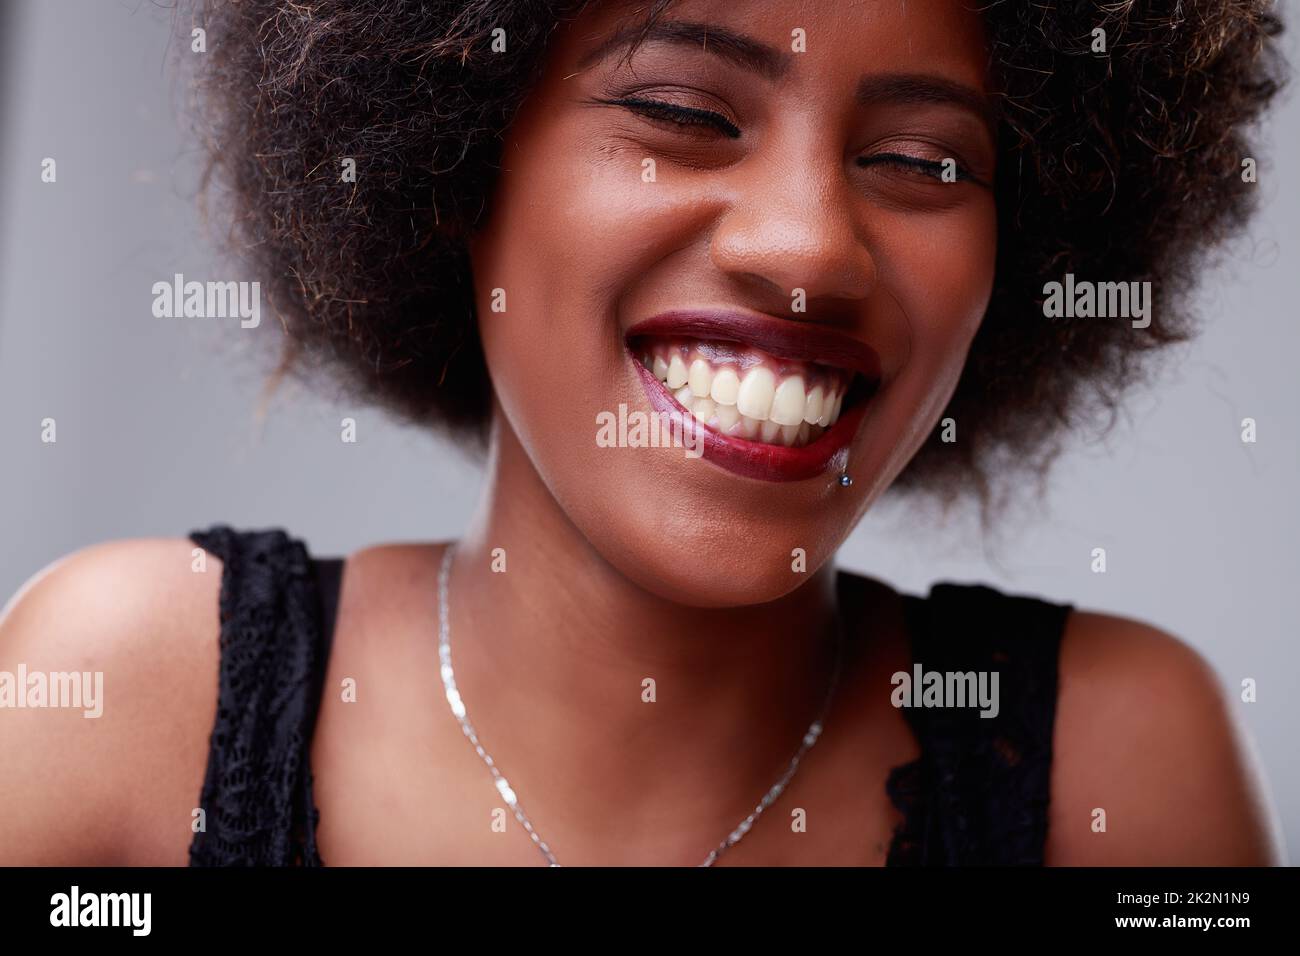 Happy young Black woman with a beaming toothy smile Stock Photo